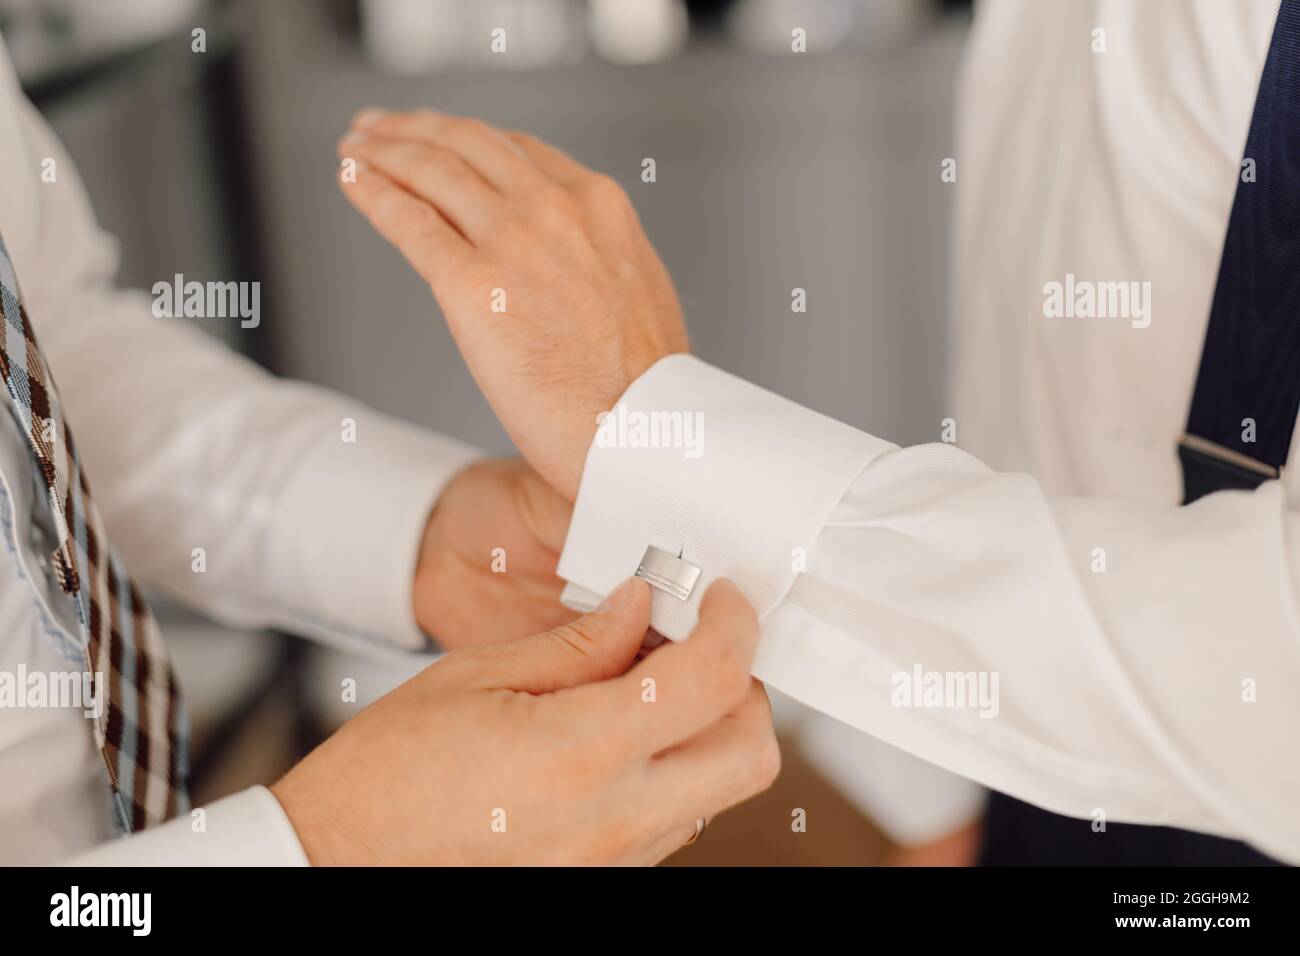 Wedding day of young man, button up cufflinks on white shirt. Elegance and business style concept. Stock Photo